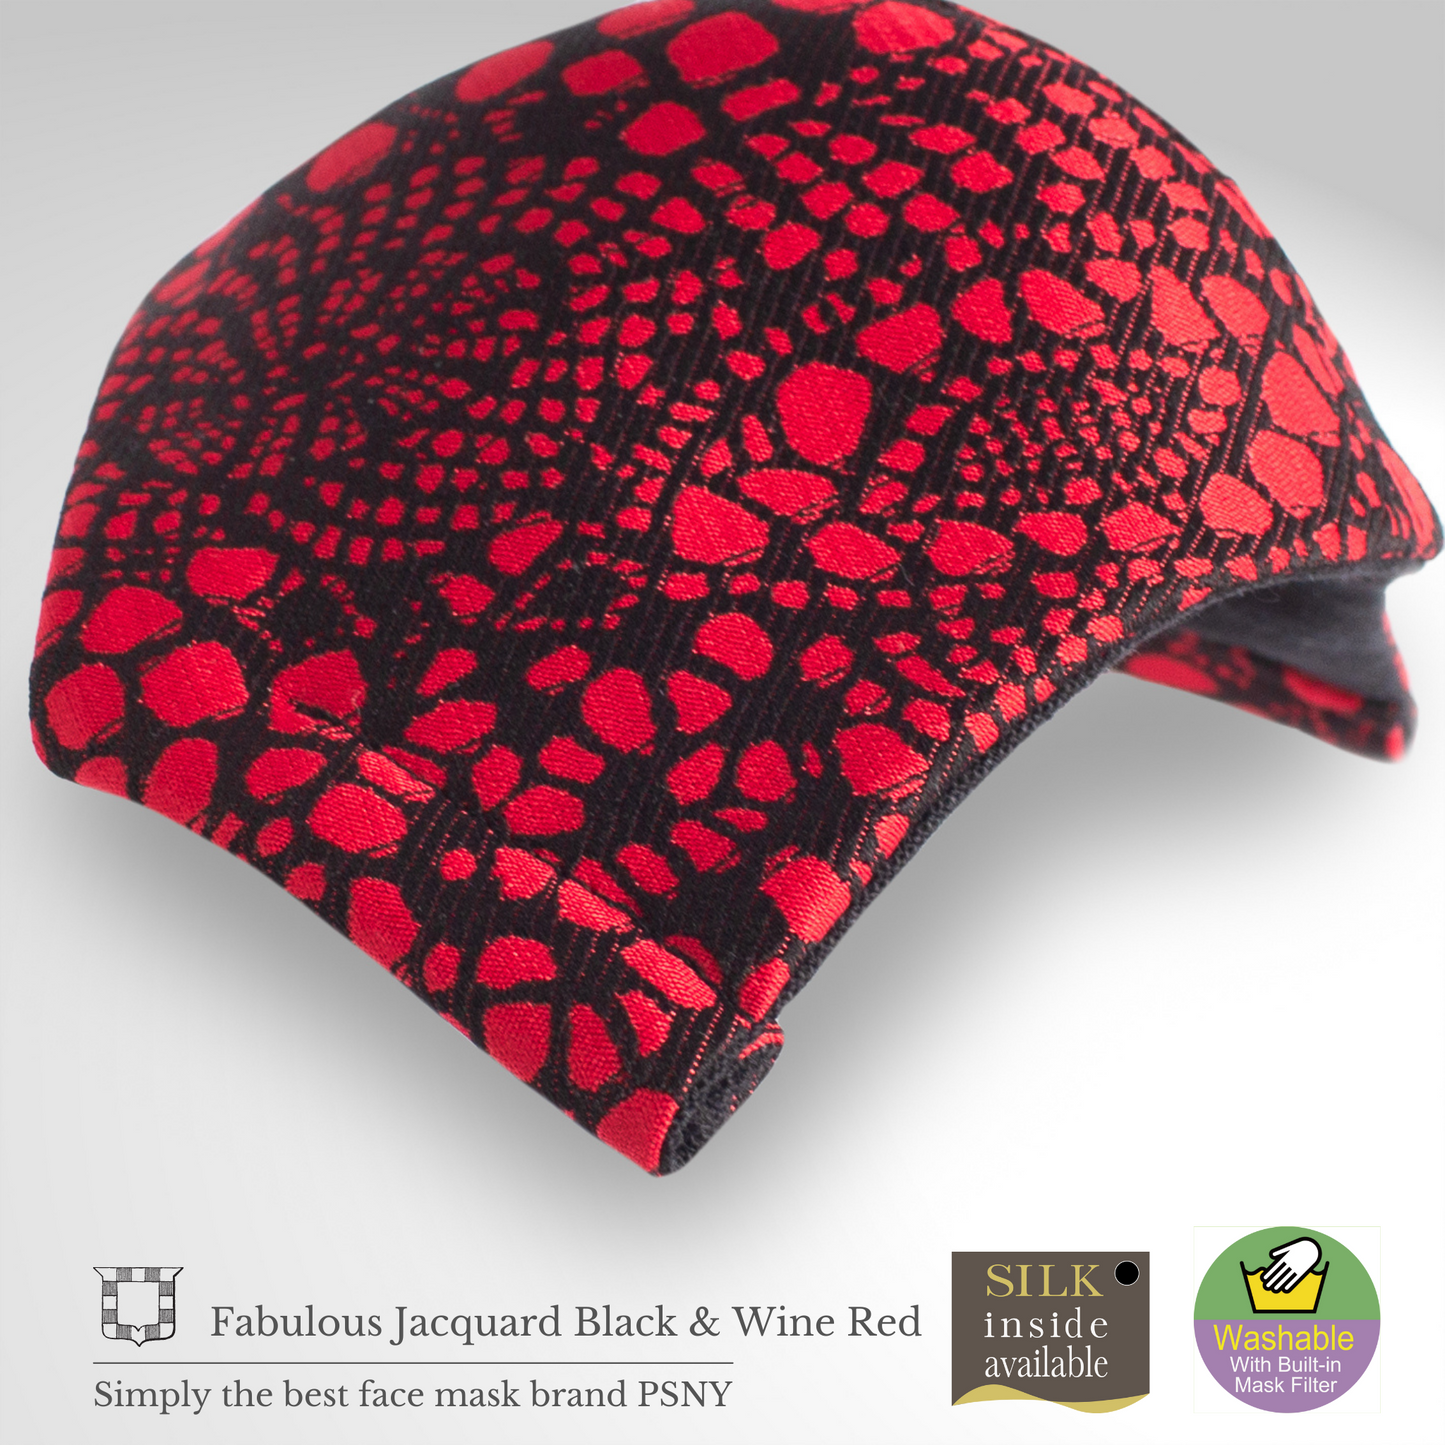 PSNY Jacquard Woven Black &amp; Wine Red 2 Mask with Nonwoven Filter 3D Adult Beautiful Mask FG18